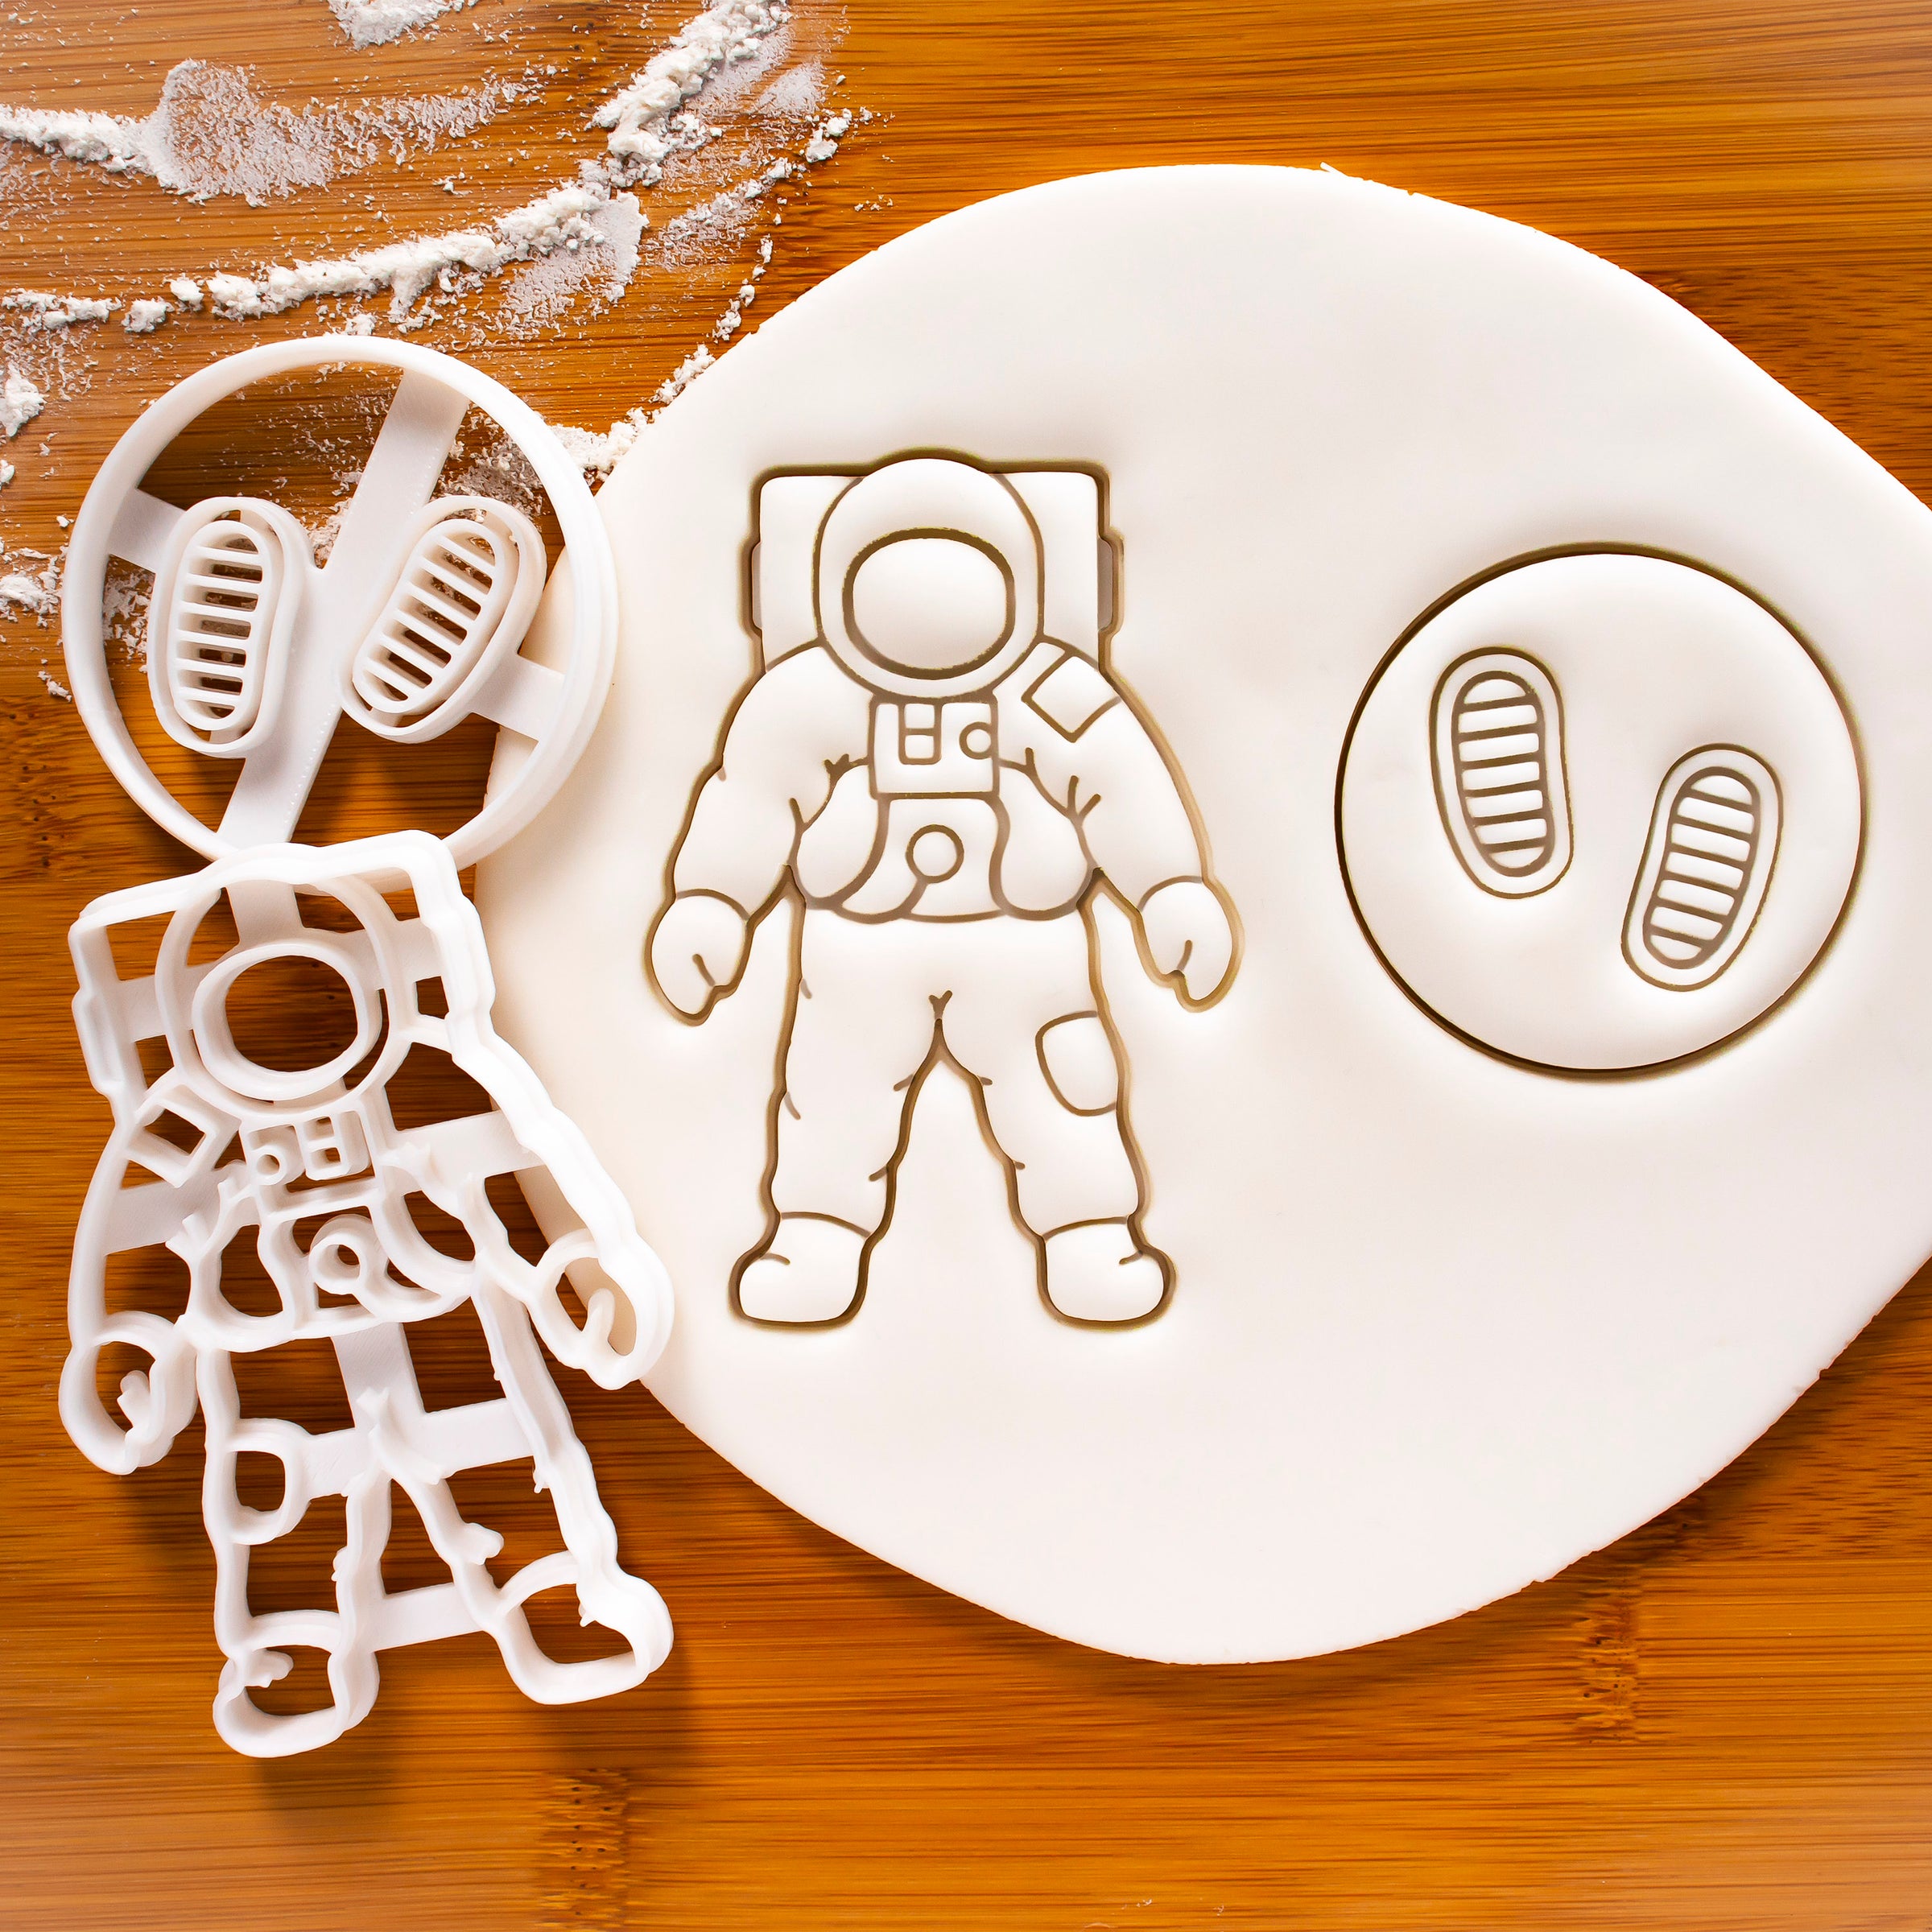 Set of 2 cookie cutters - Astronaut Footprints and Space Astronaut